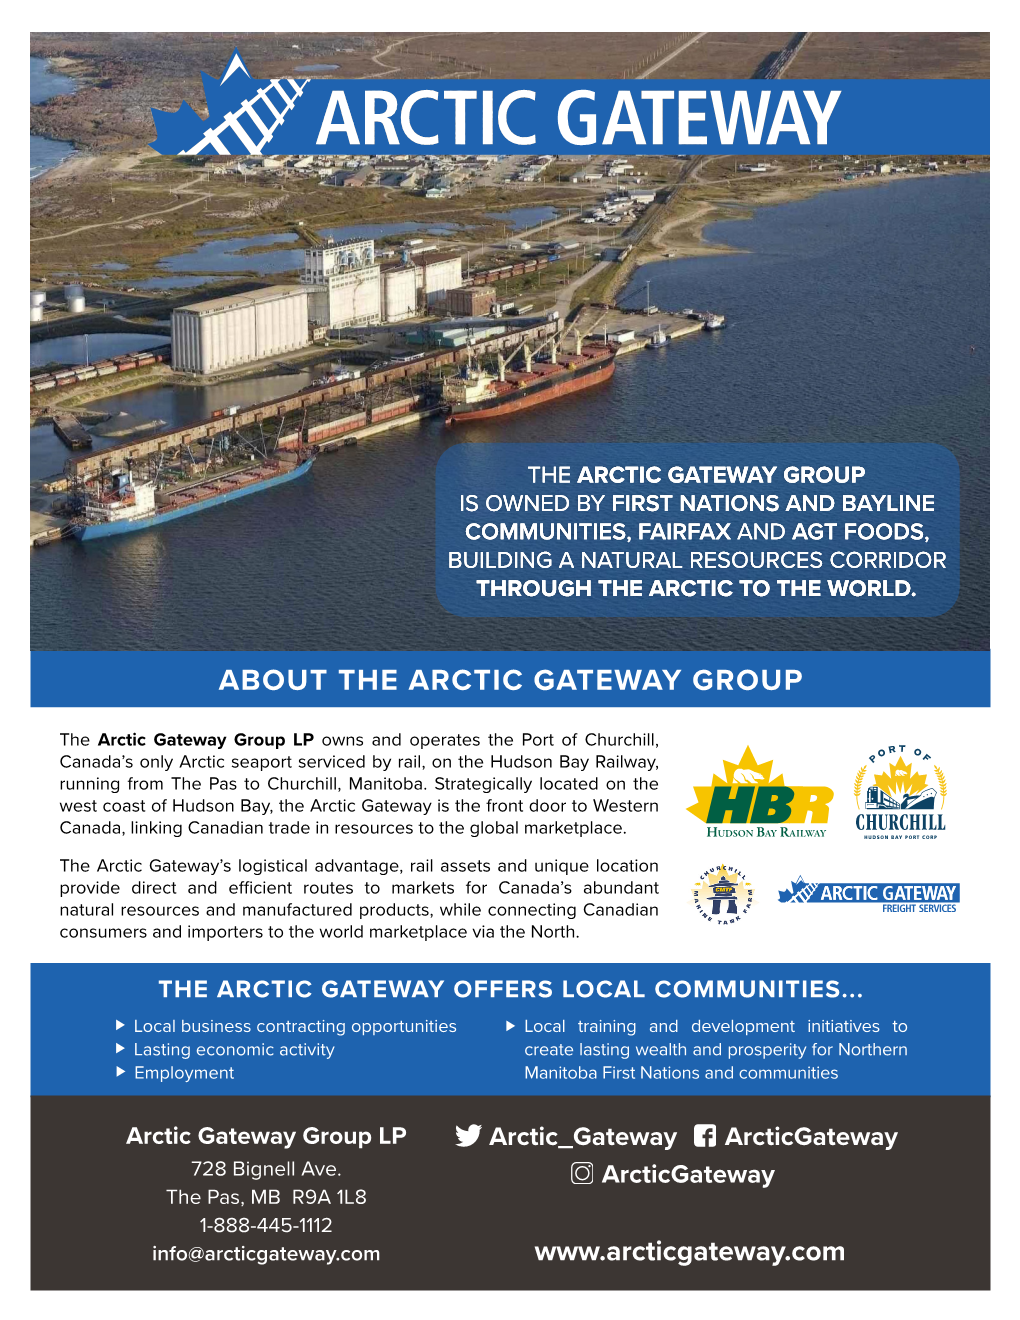 About the Arctic Gateway Group